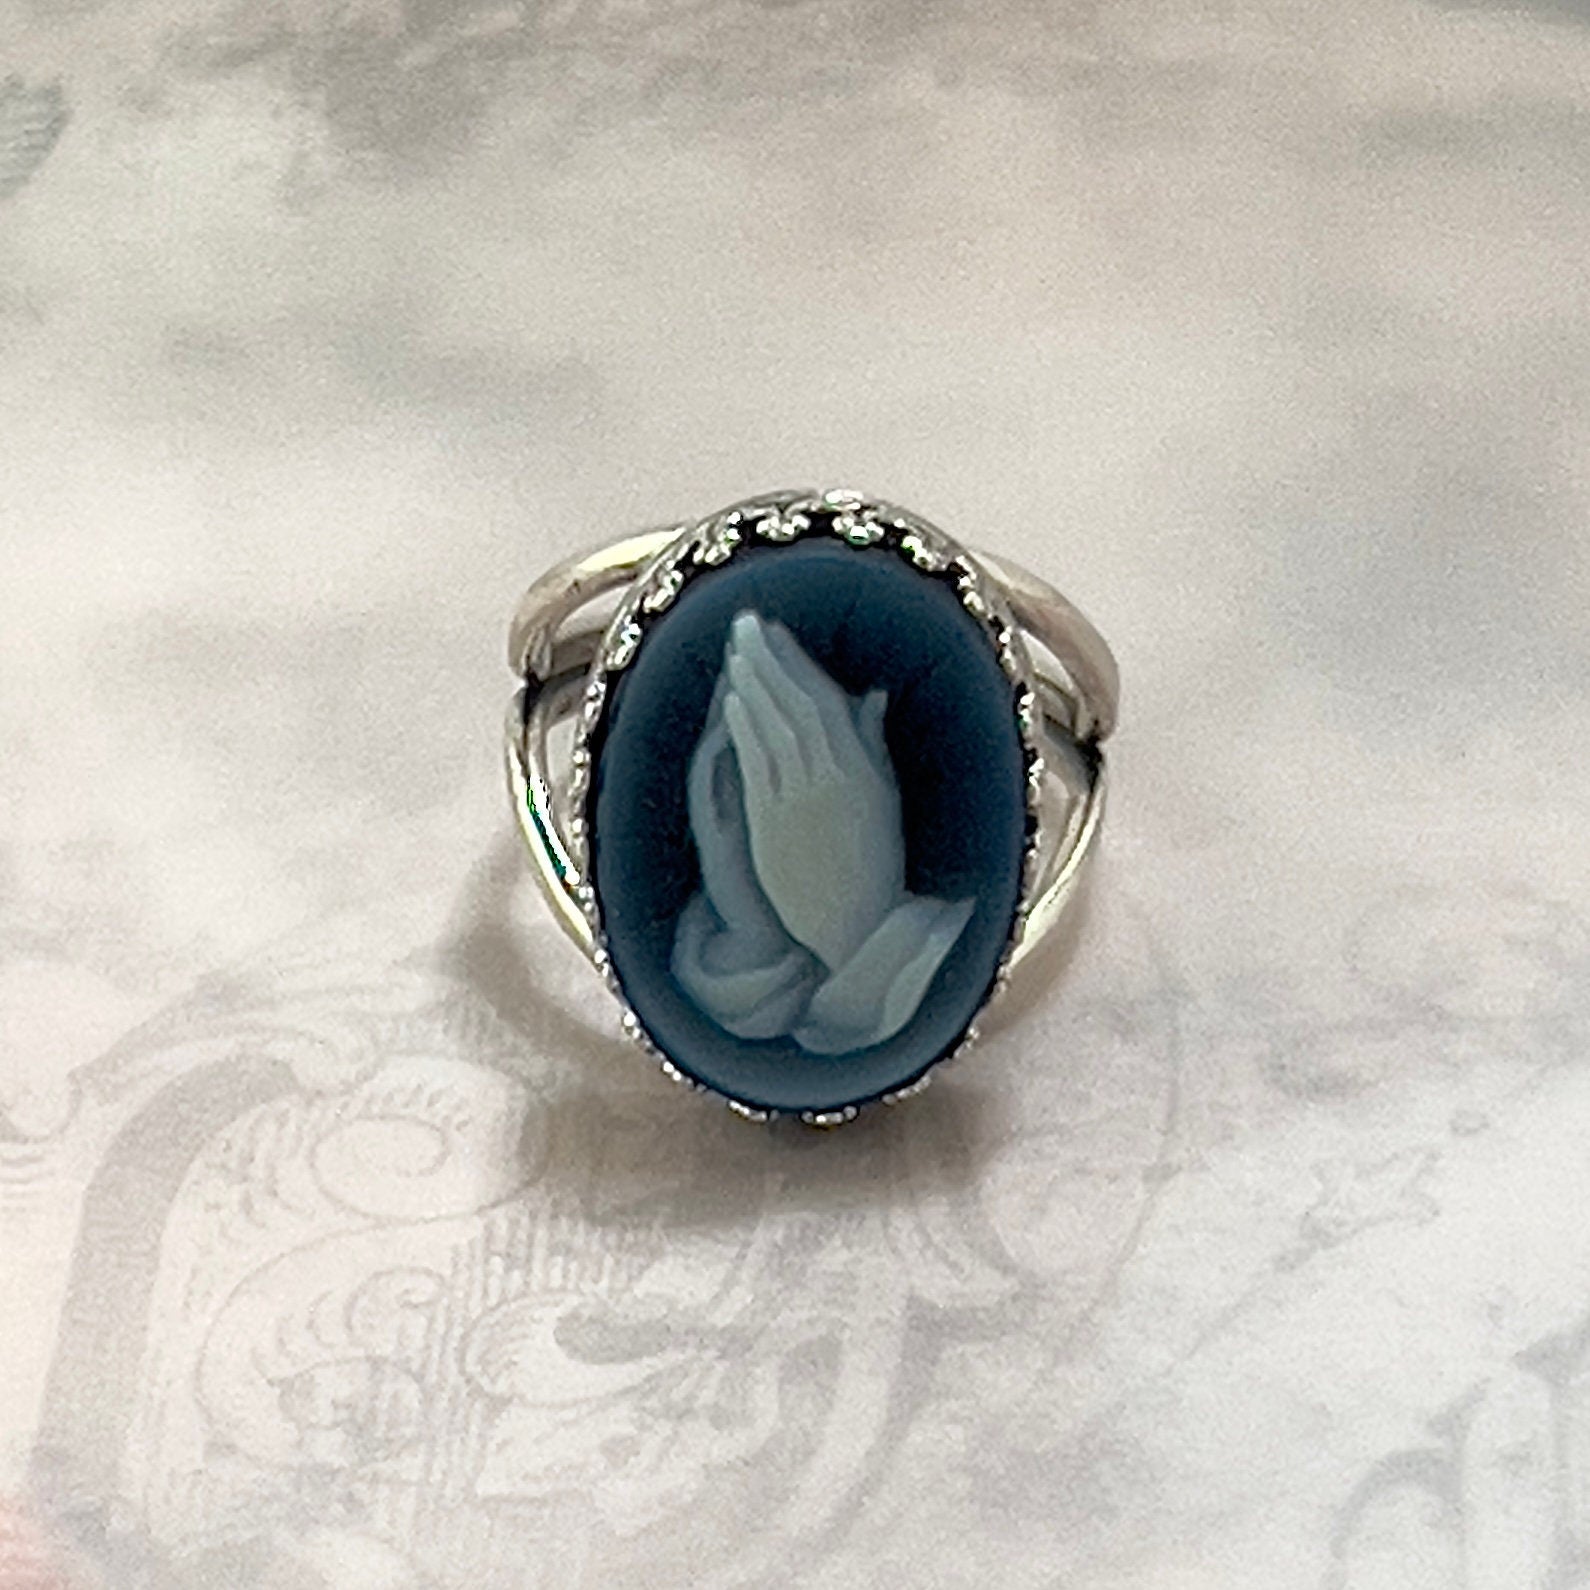 Blue Agate Cameo Ring, Christian Jewelry, Praying Hands Adjustable Sterling Silver Ring, Religious Gift